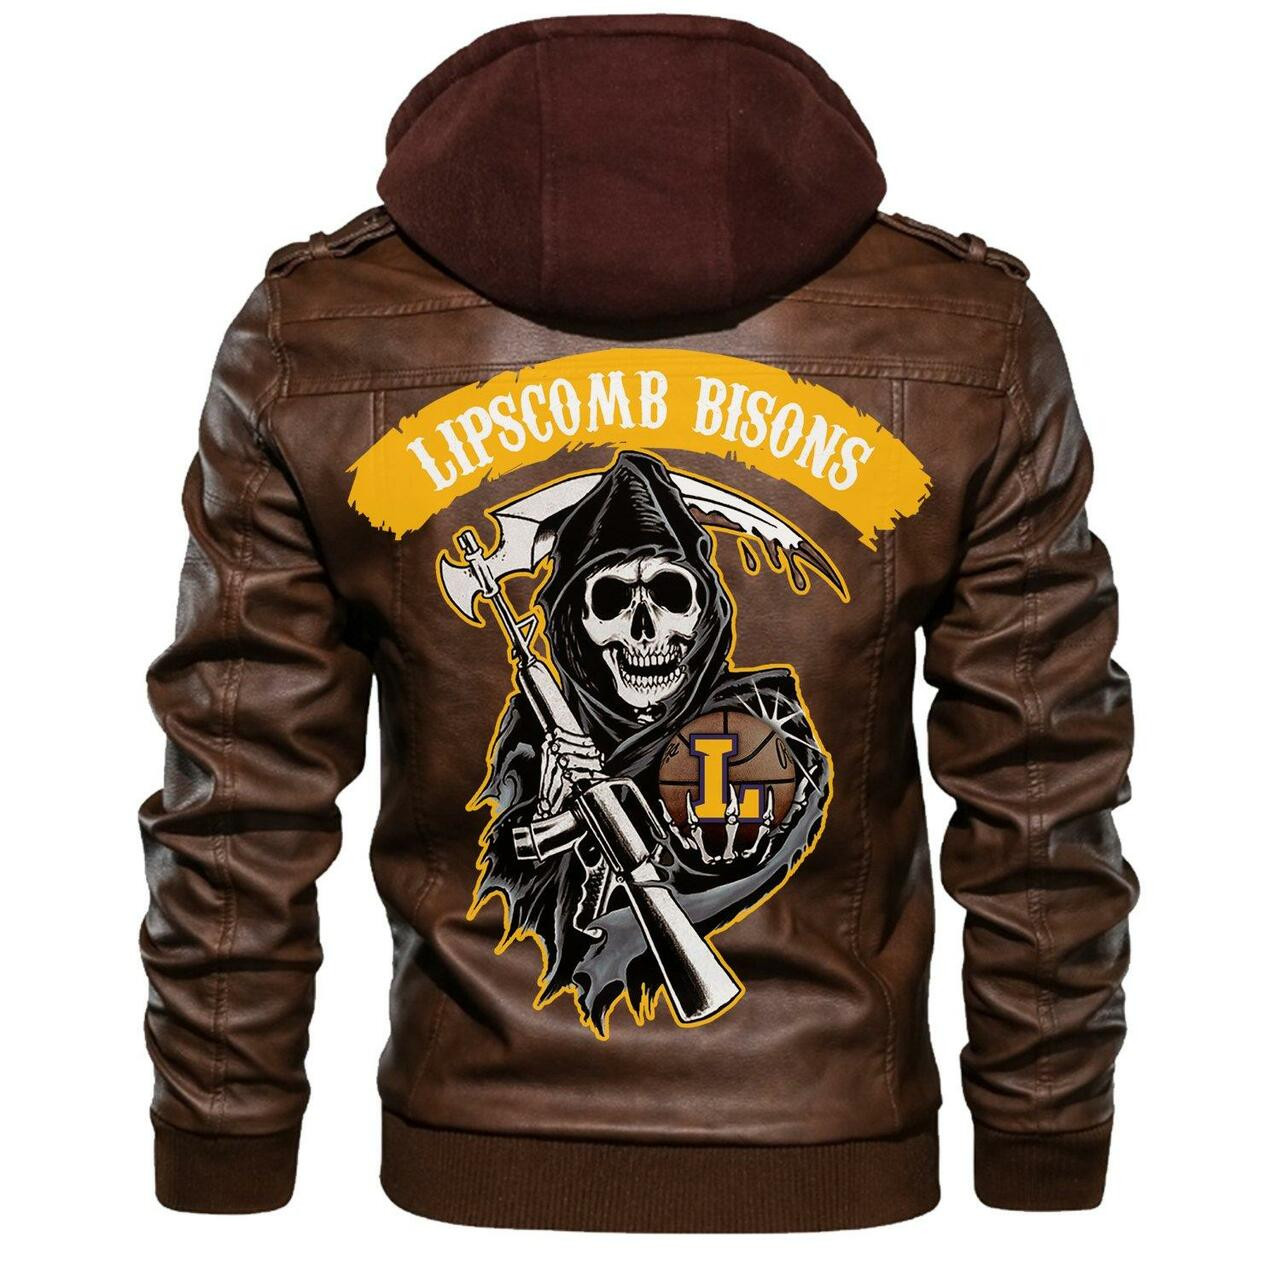 Don't wait another minute, Get Hot Leather Jacket today 122